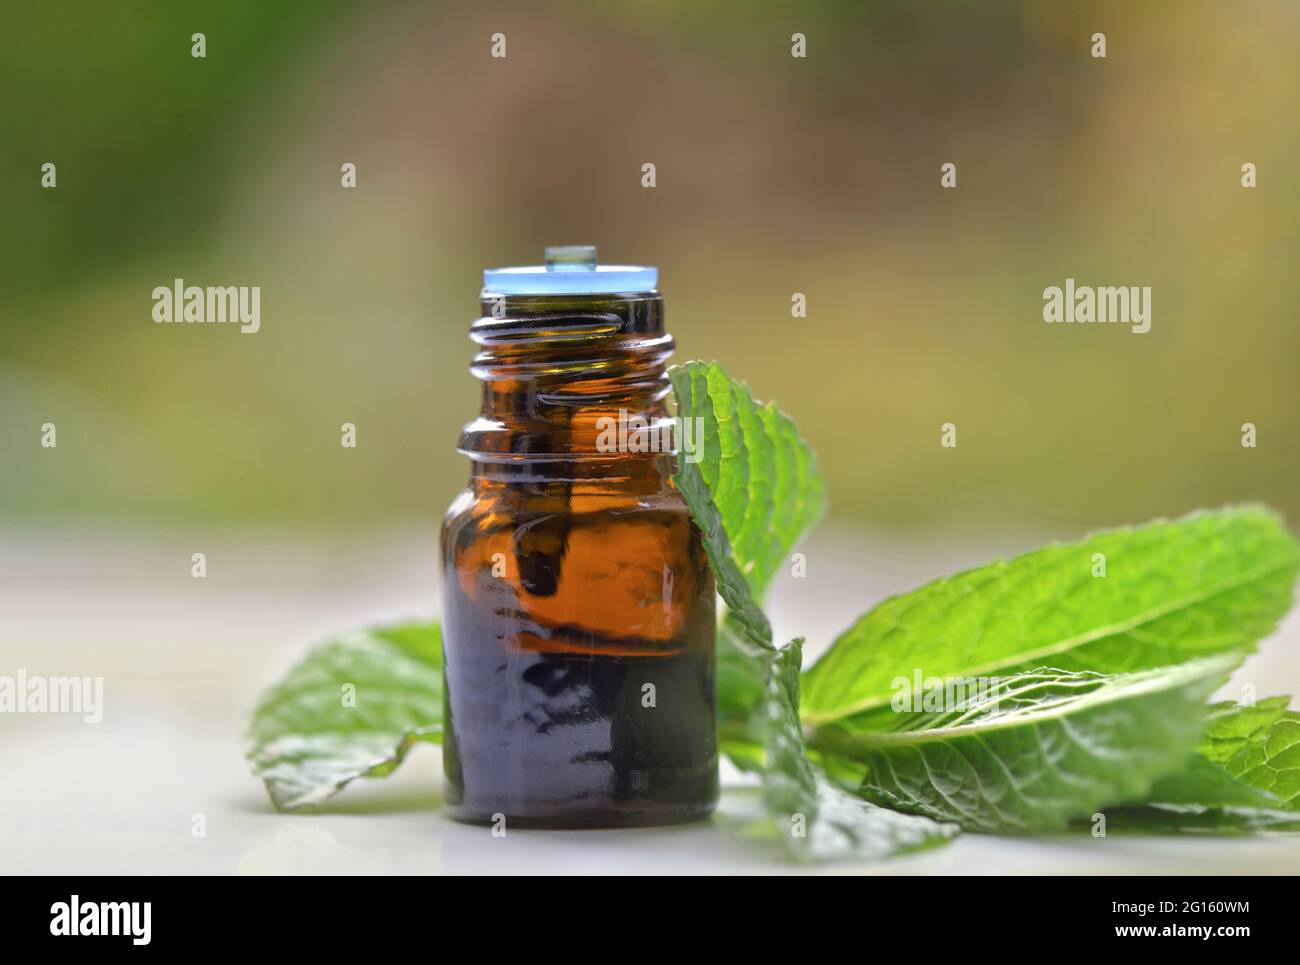 mint leaf with a bottle of aromatic oil on blur background Stock Photo